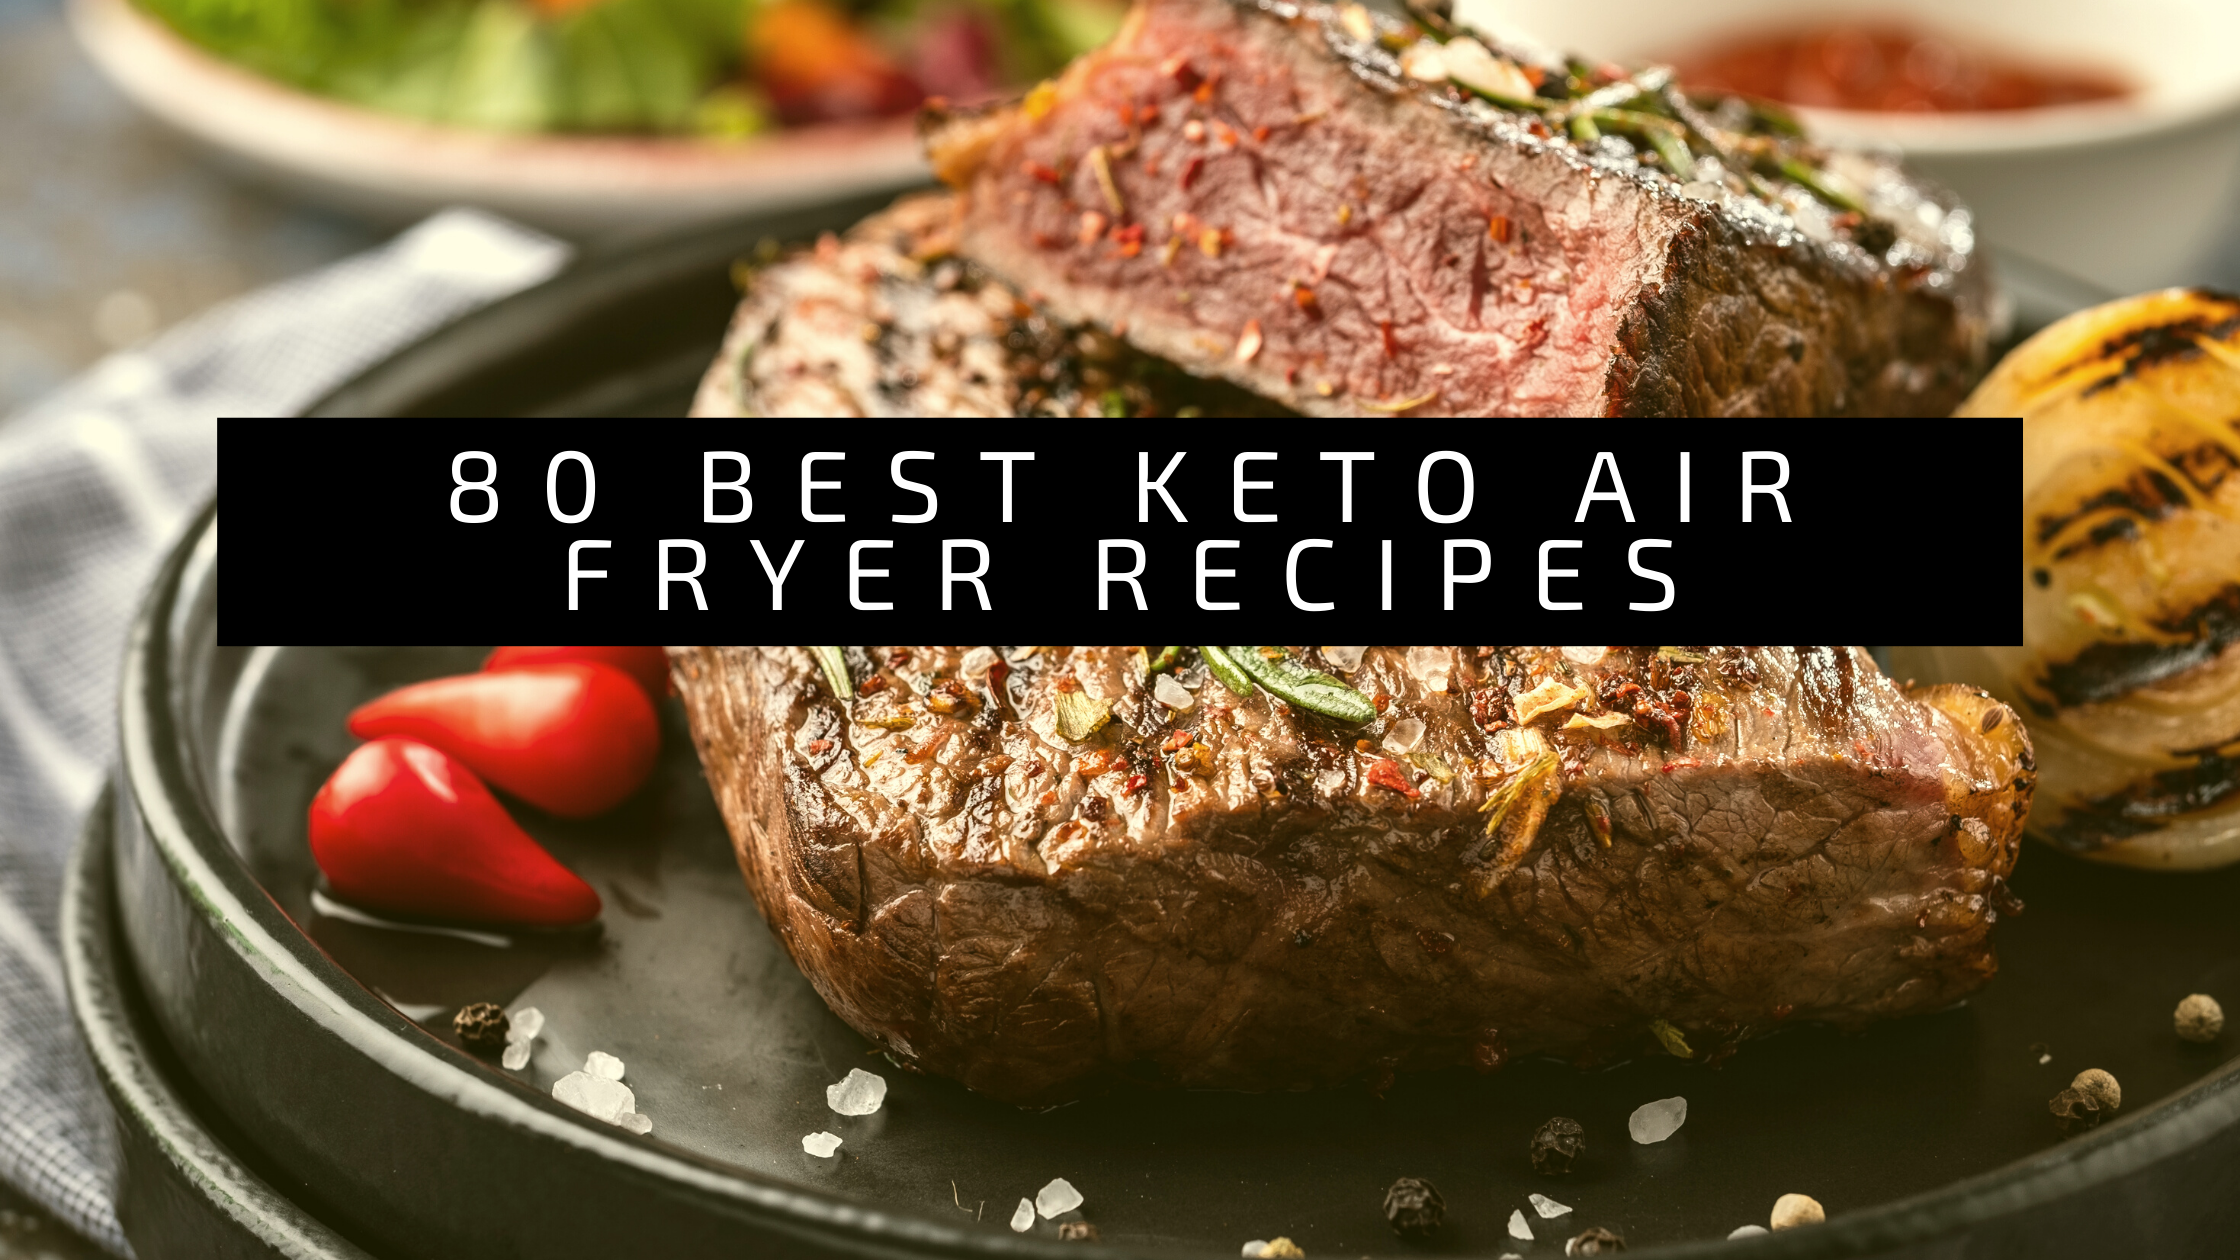 40 Family-Friendly Keto Air Fryer Recipes for Quick and Delicious Meals 26